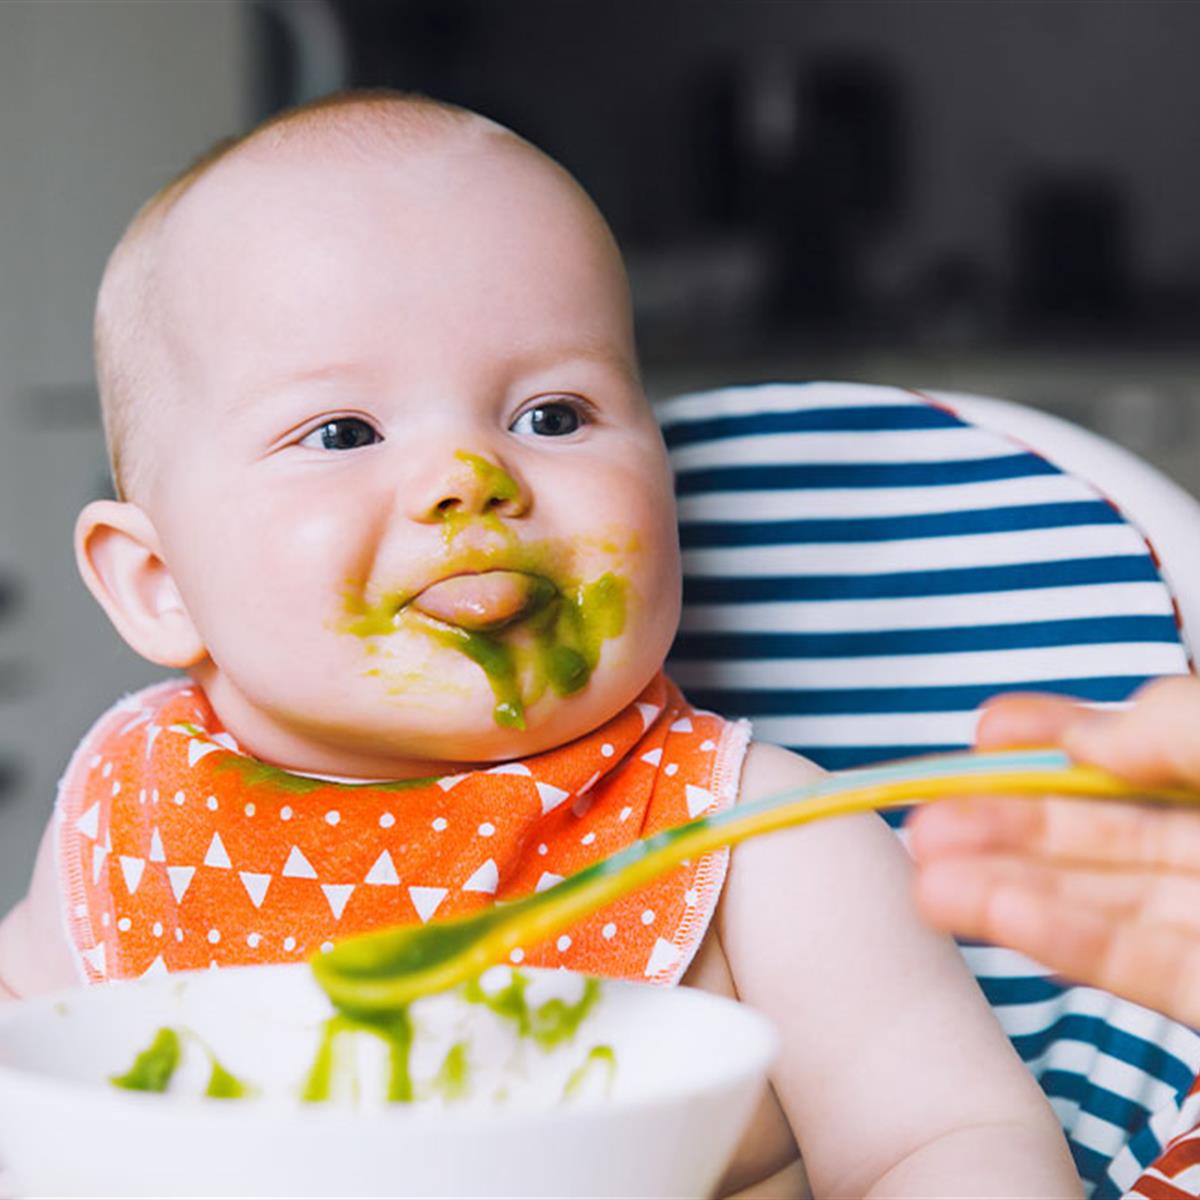 Baby's First Food: How To Introduce Solids